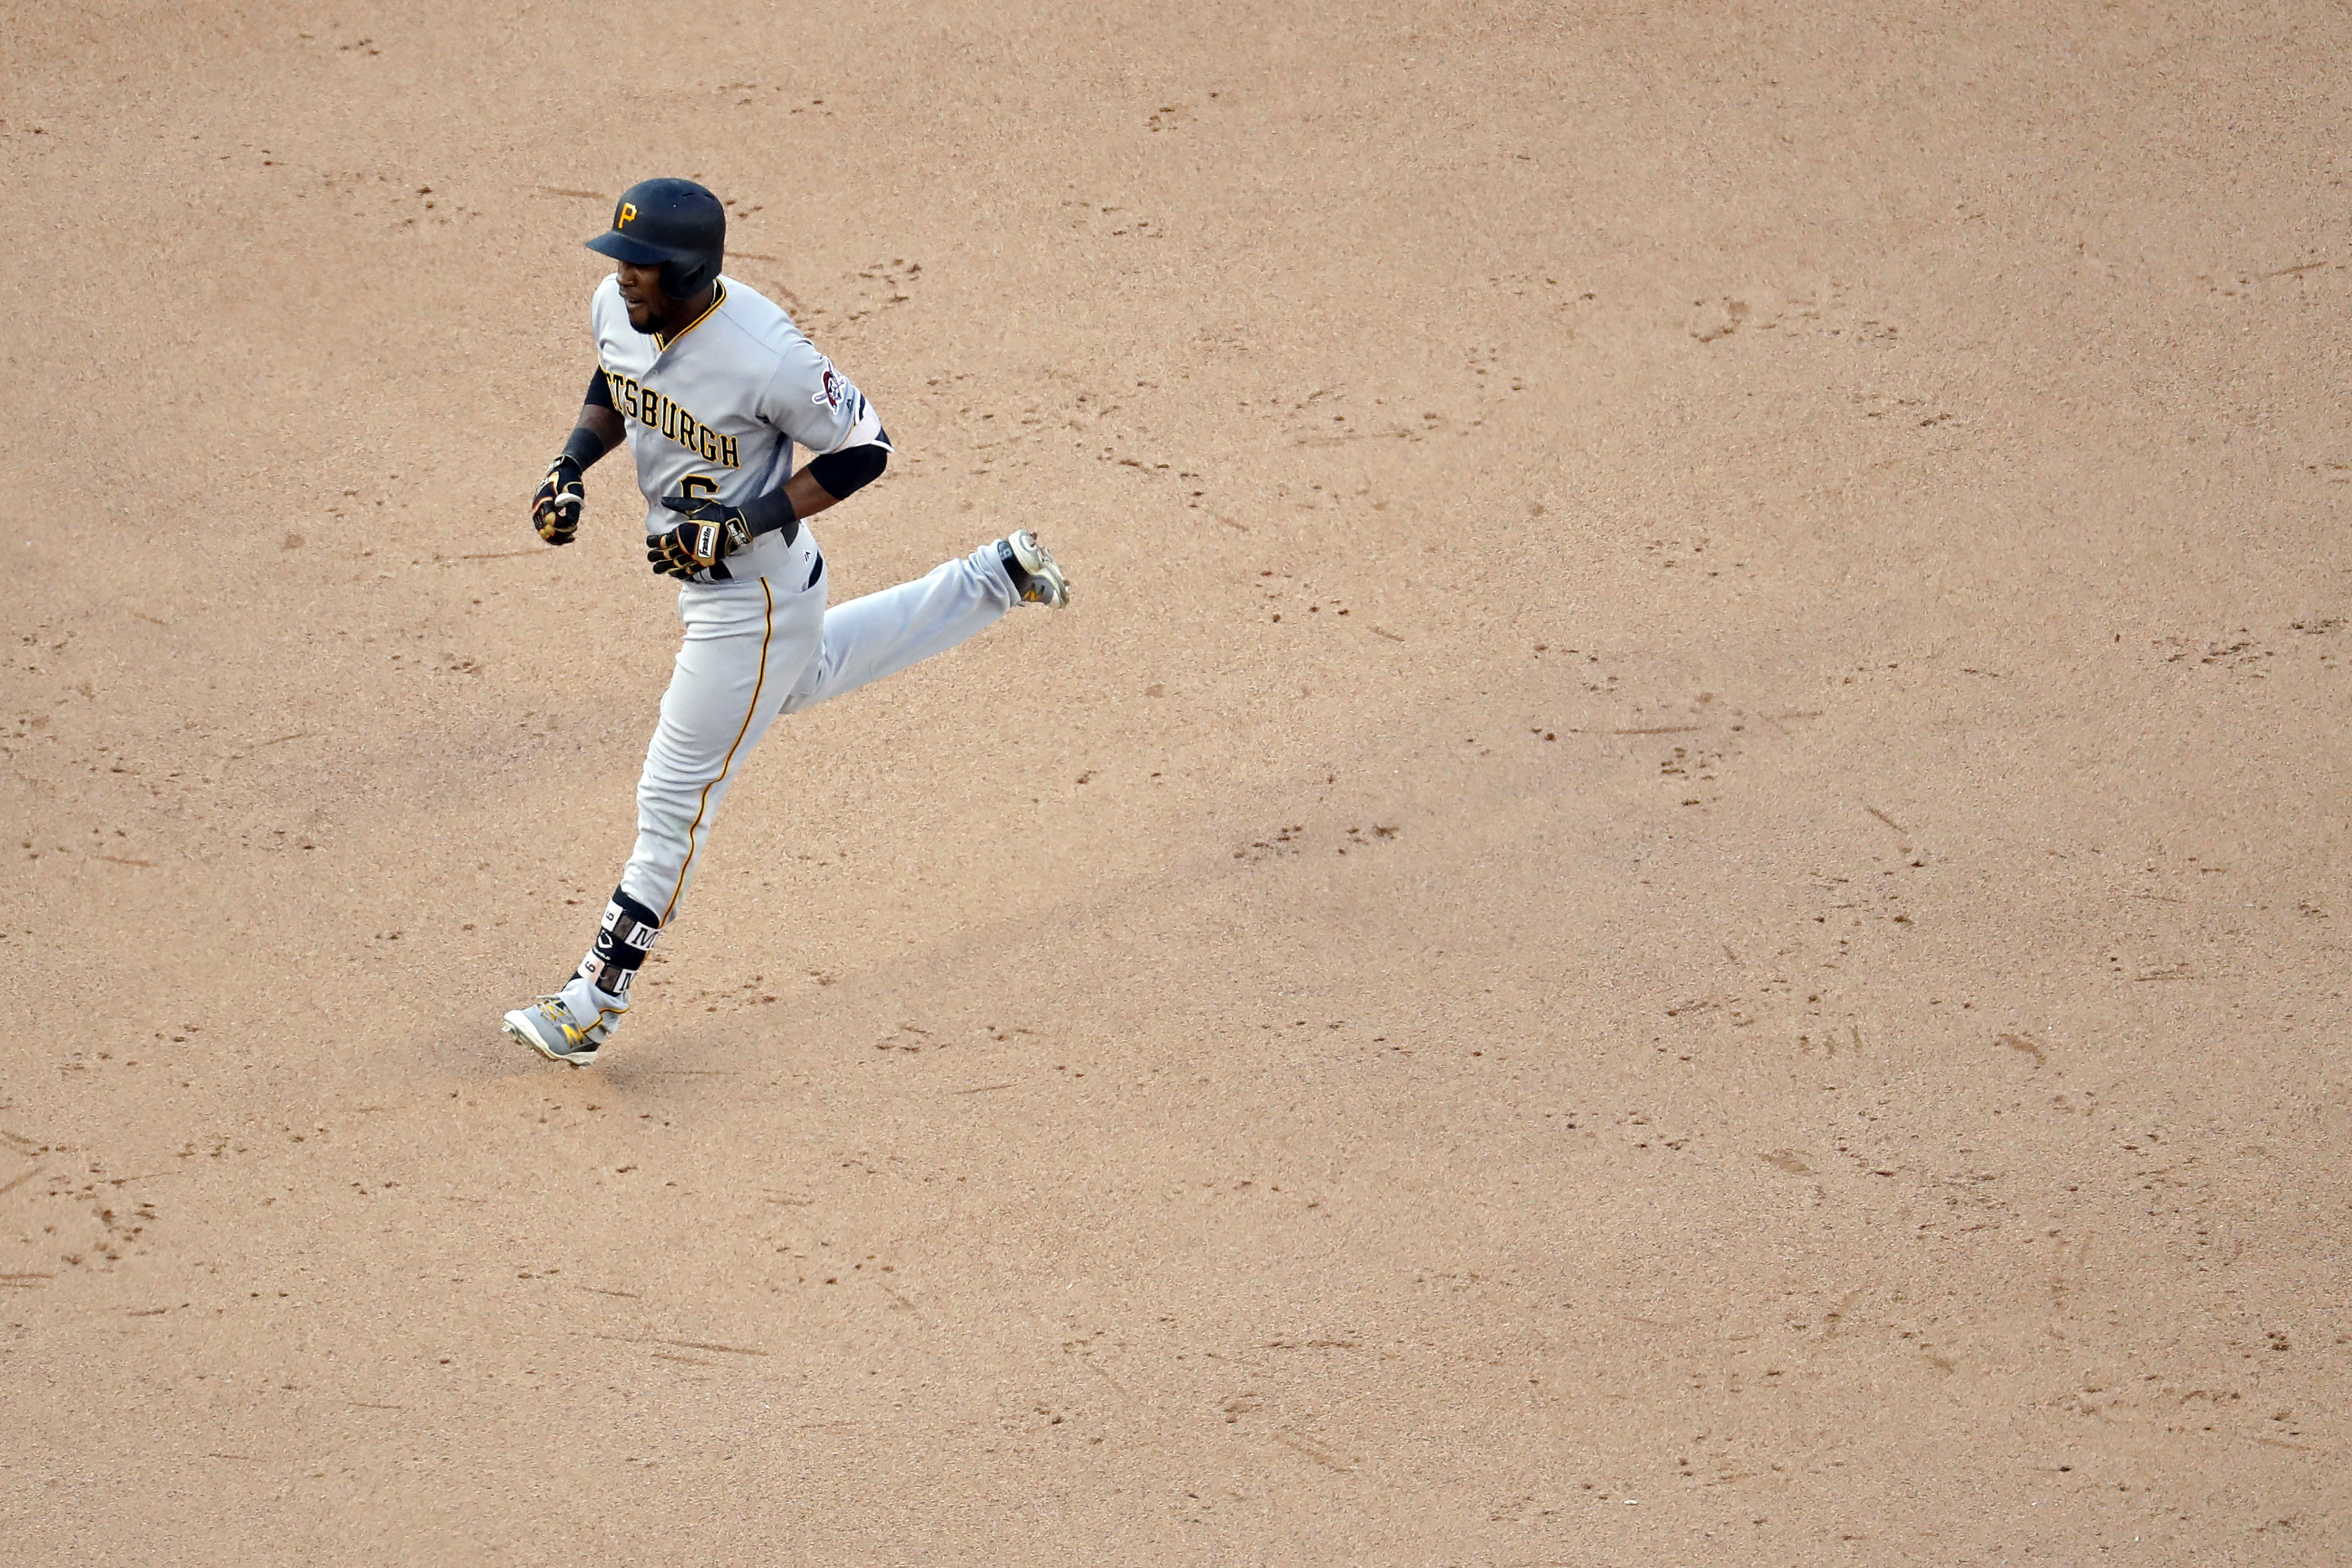 Starling Marte triples, then walks off after replay review